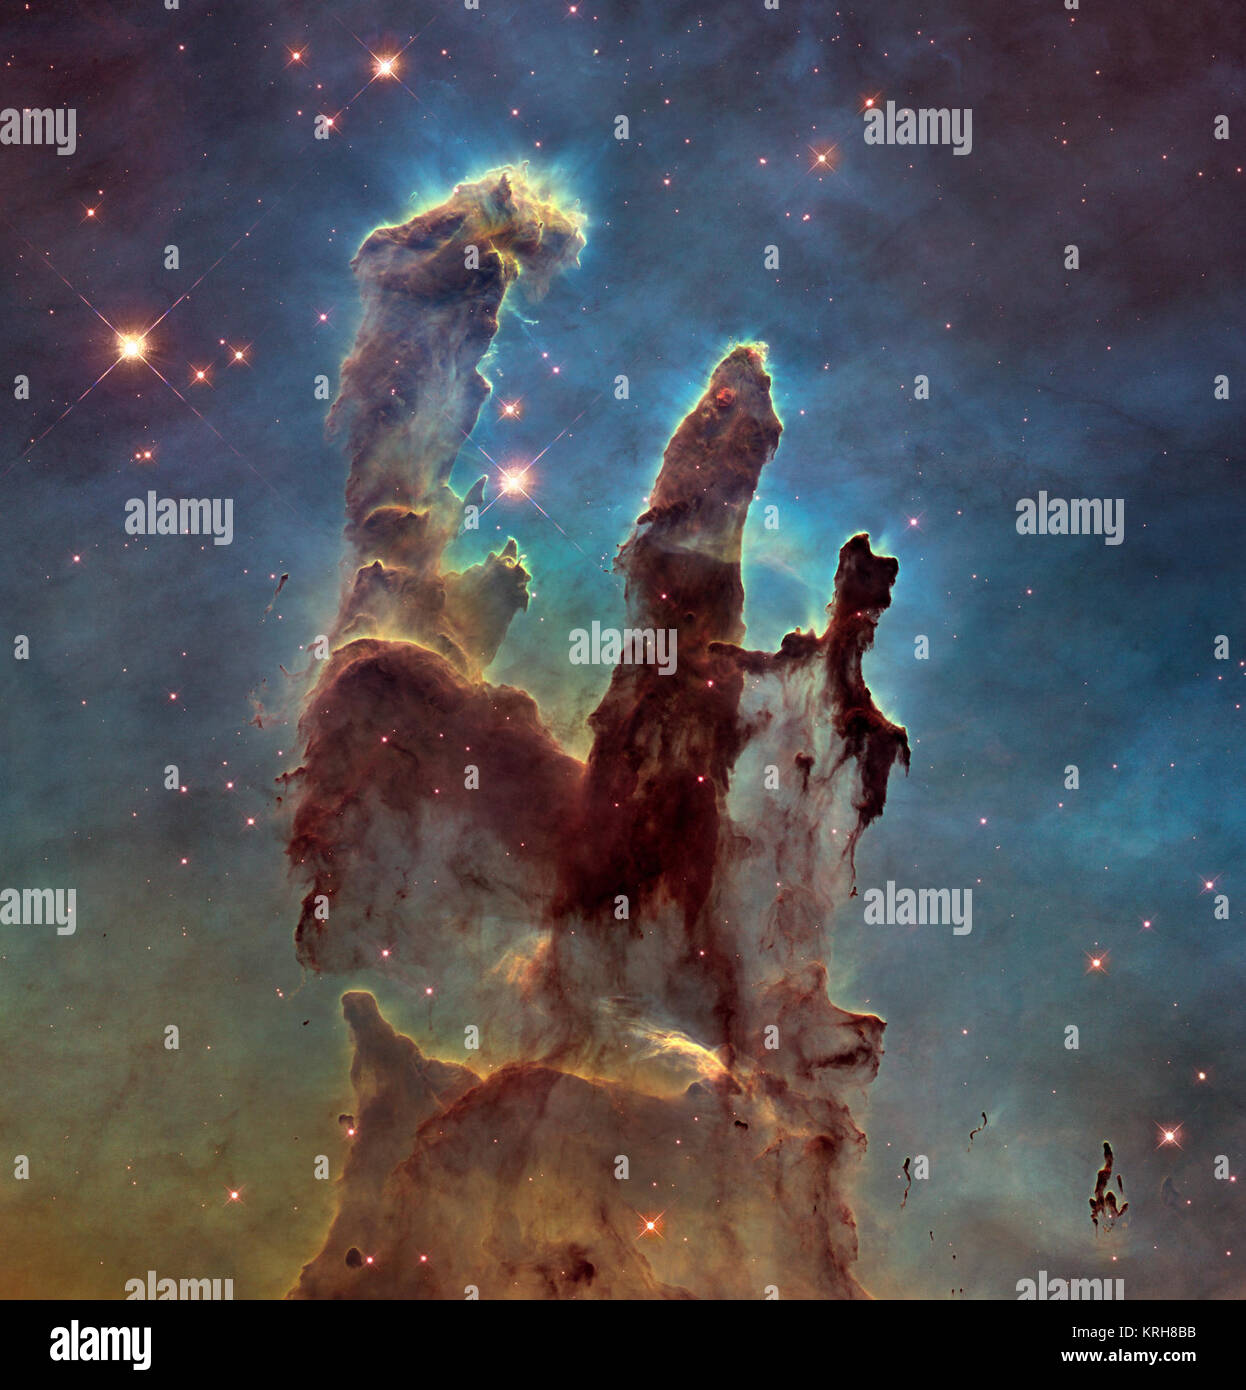 NASA's Hubble Space Telescope has revisited the famous Pillars of Creation, revealing a sharper and wider view of the structures in this visible-light image. Astronomers combined several Hubble exposures to assemble the wider view. The towering pillars are about 5 light-years tall. The dark, finger-like feature at bottom right may be a smaller version of the giant pillars. The new image was taken with Hubble's versatile and sharp-eyed Wide Field Camera 3. The pillars are bathed in the blistering ultraviolet light from a grouping of young, massive stars located off the top of the image. Streame Stock Photo